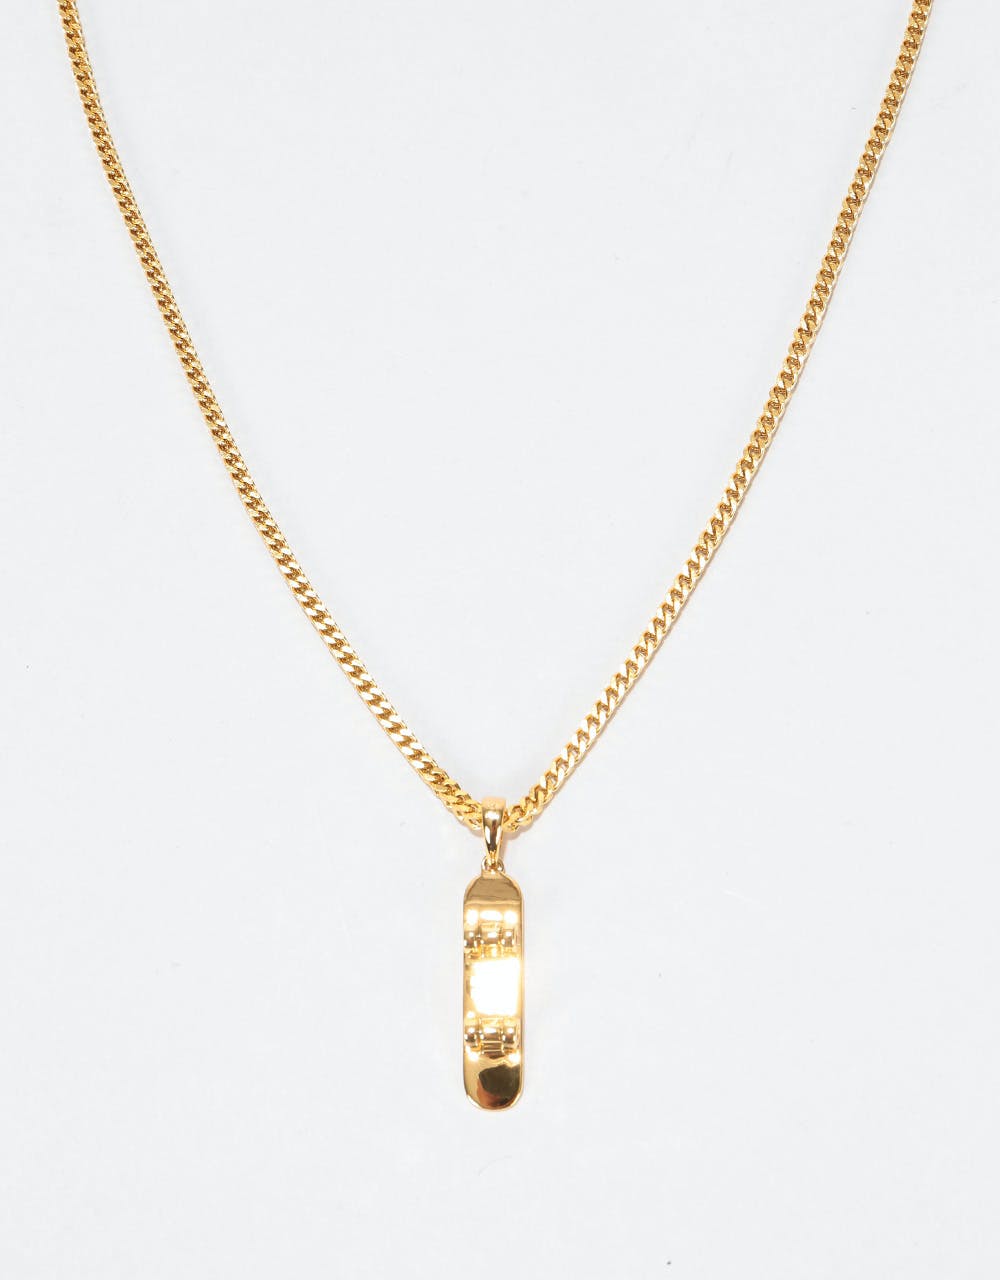 Midvs Co 18K Gold Plated Deck Necklace - Gold